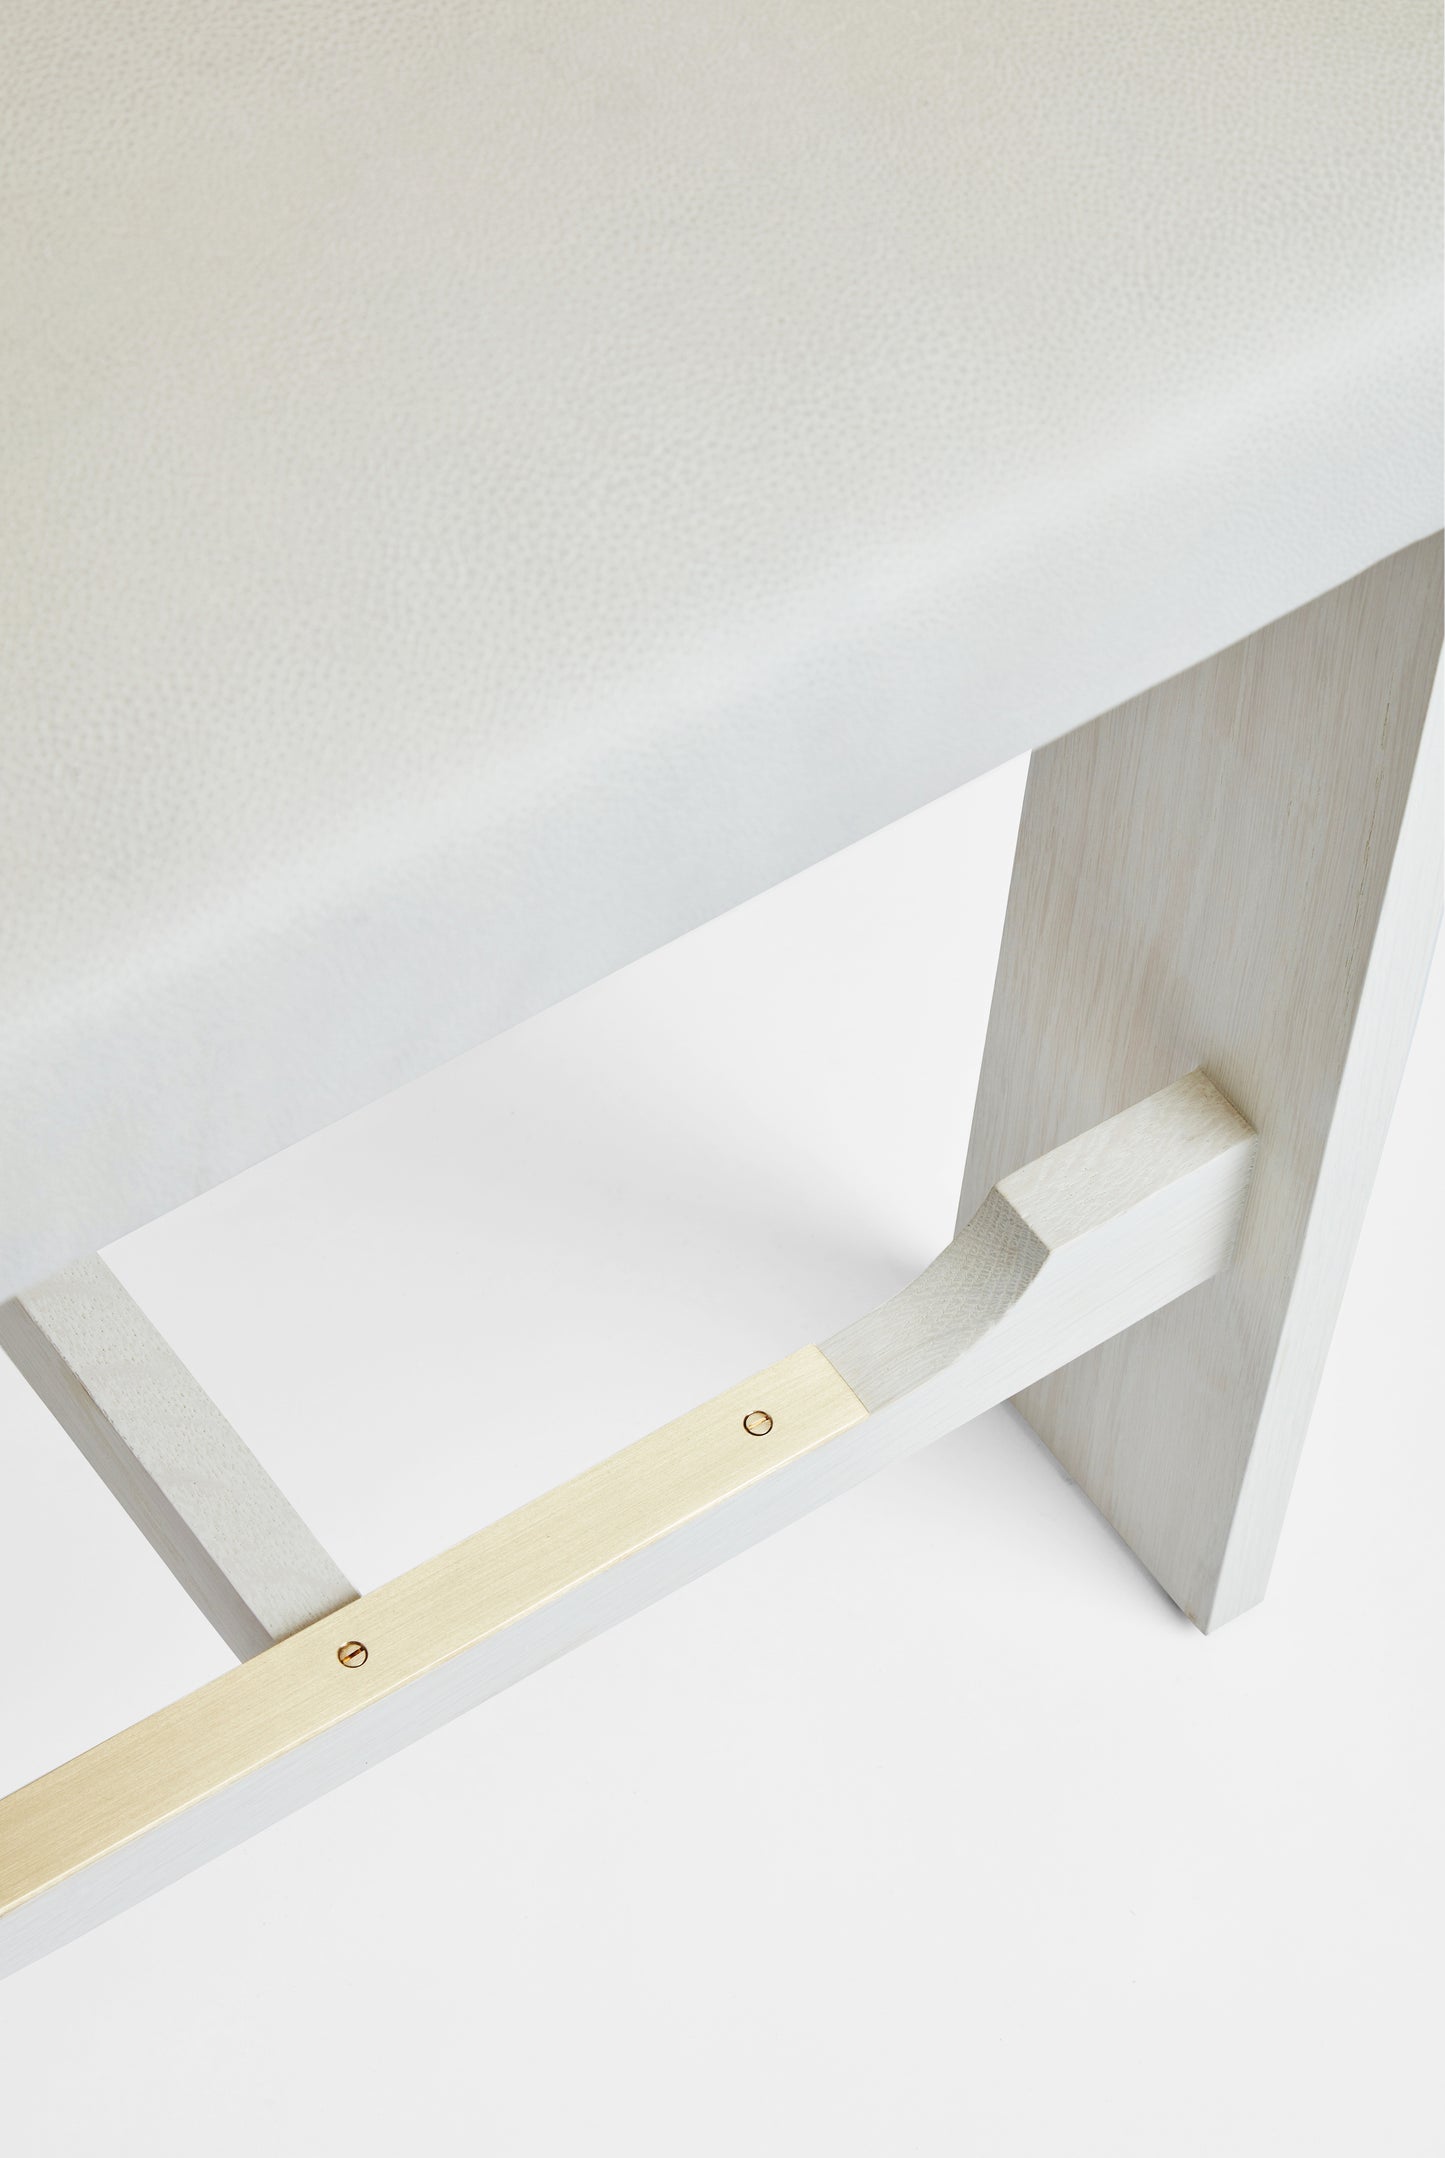 Shown in Bleached Oak frame with Unlacquered Brass foot rest